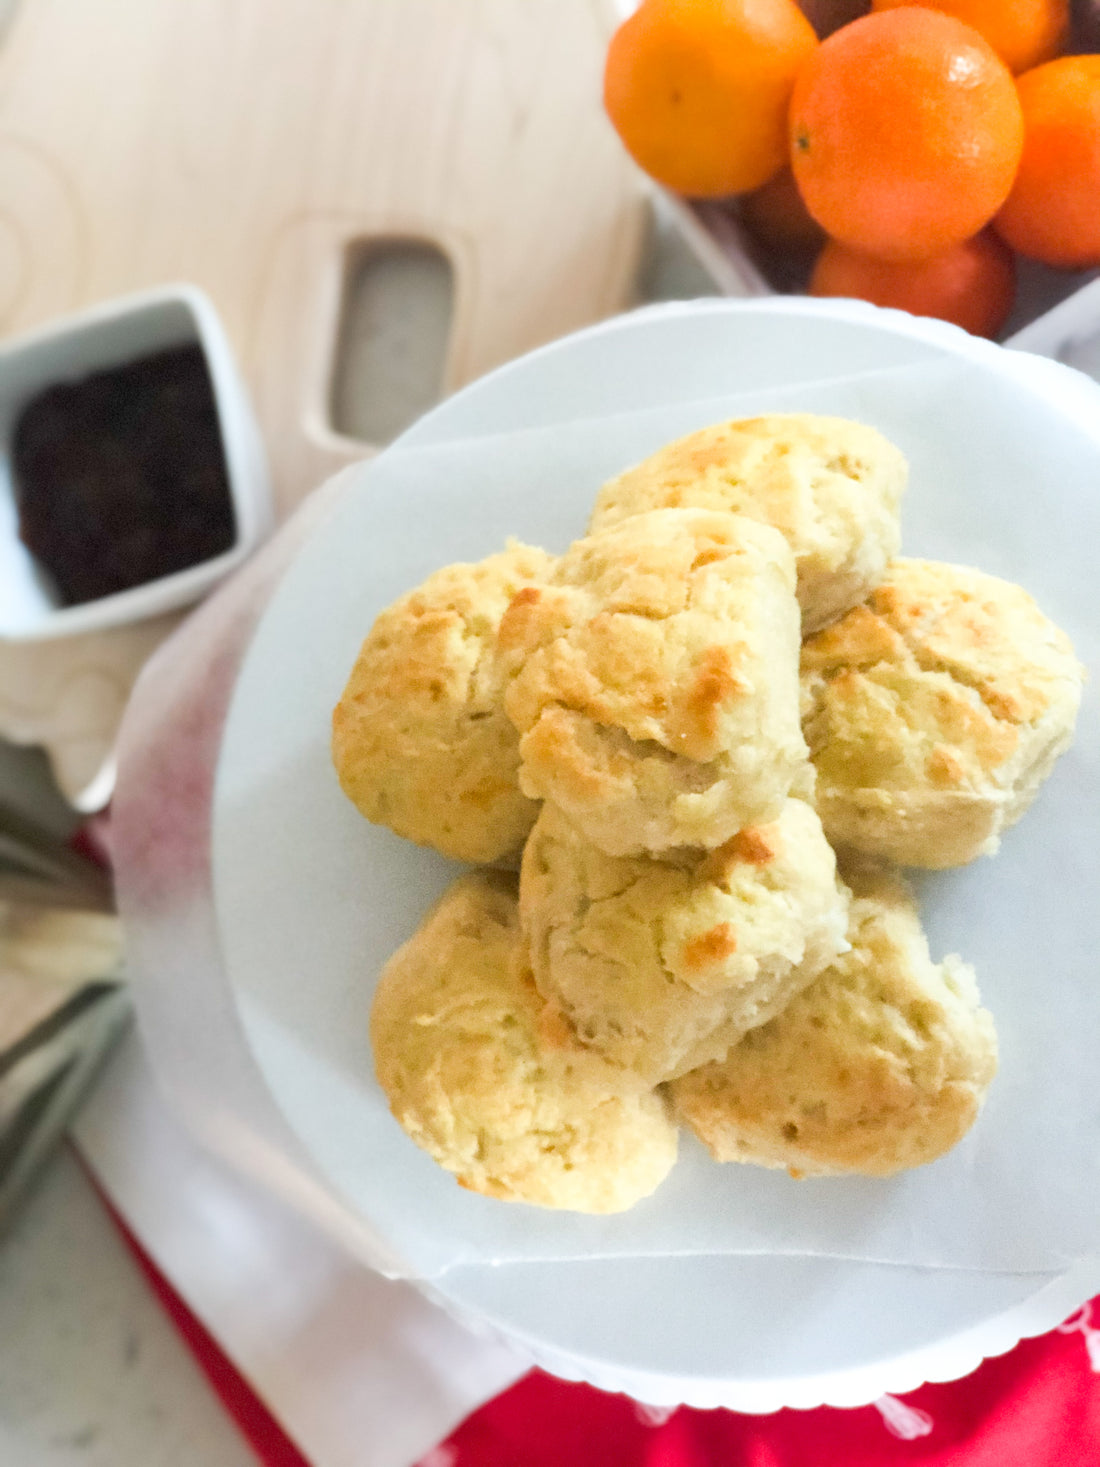 On the Kid'Chin - Buttermilk Biscuit Edition